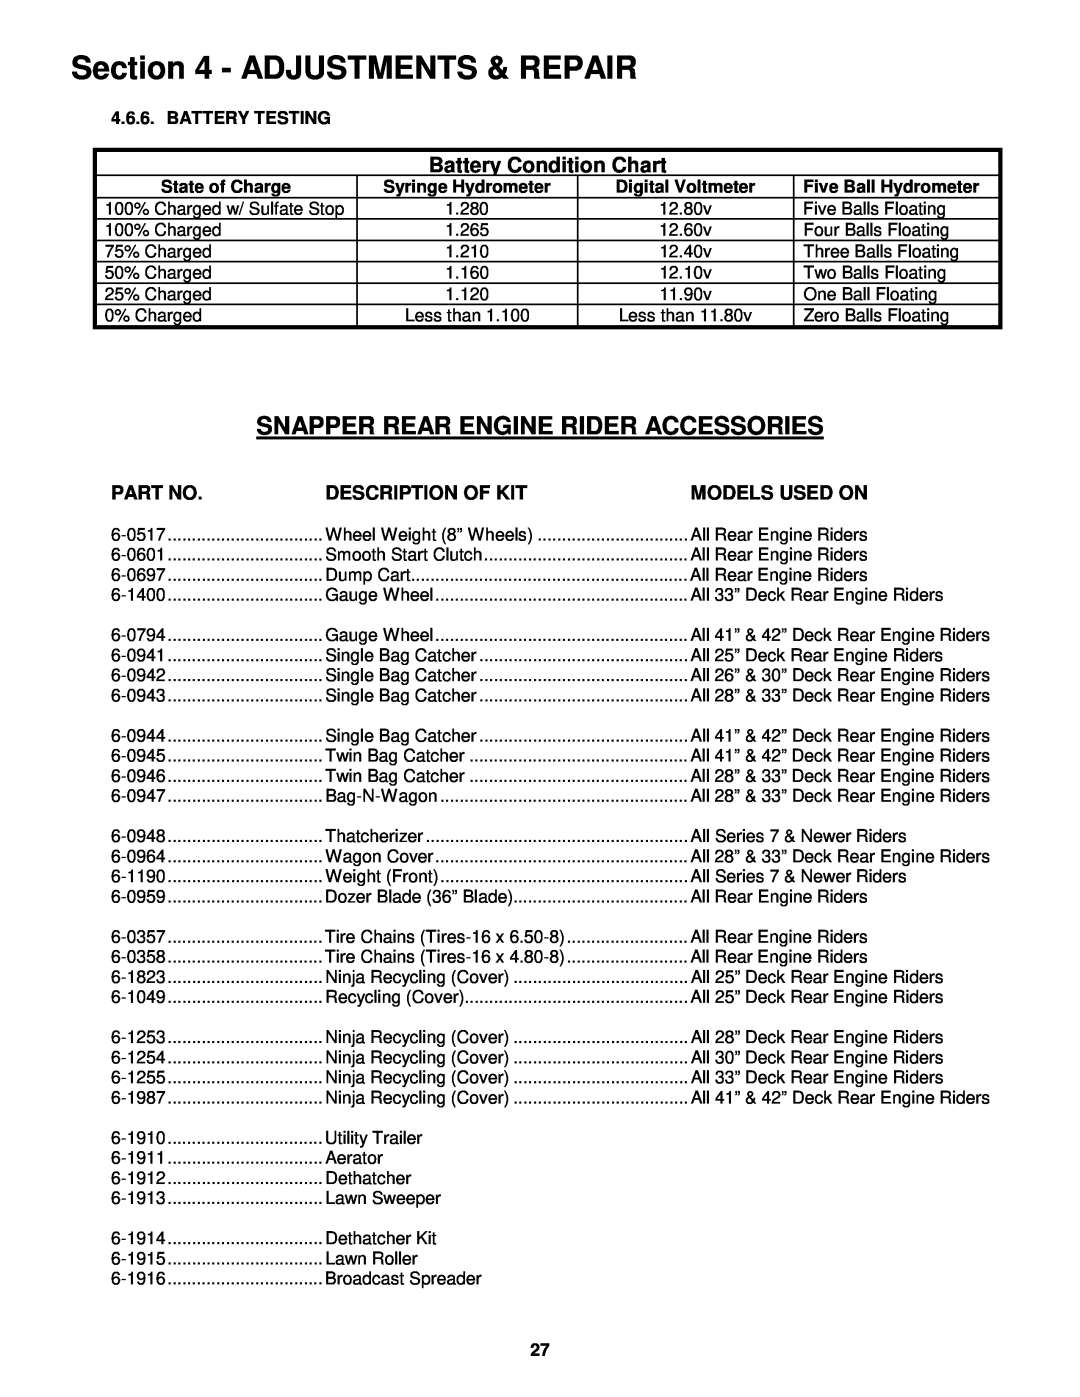 Snapper 301222BE, 331522KVE, 281222BE Snapper Rear Engine Rider Accessories, Battery Condition Chart, Adjustments & Repair 